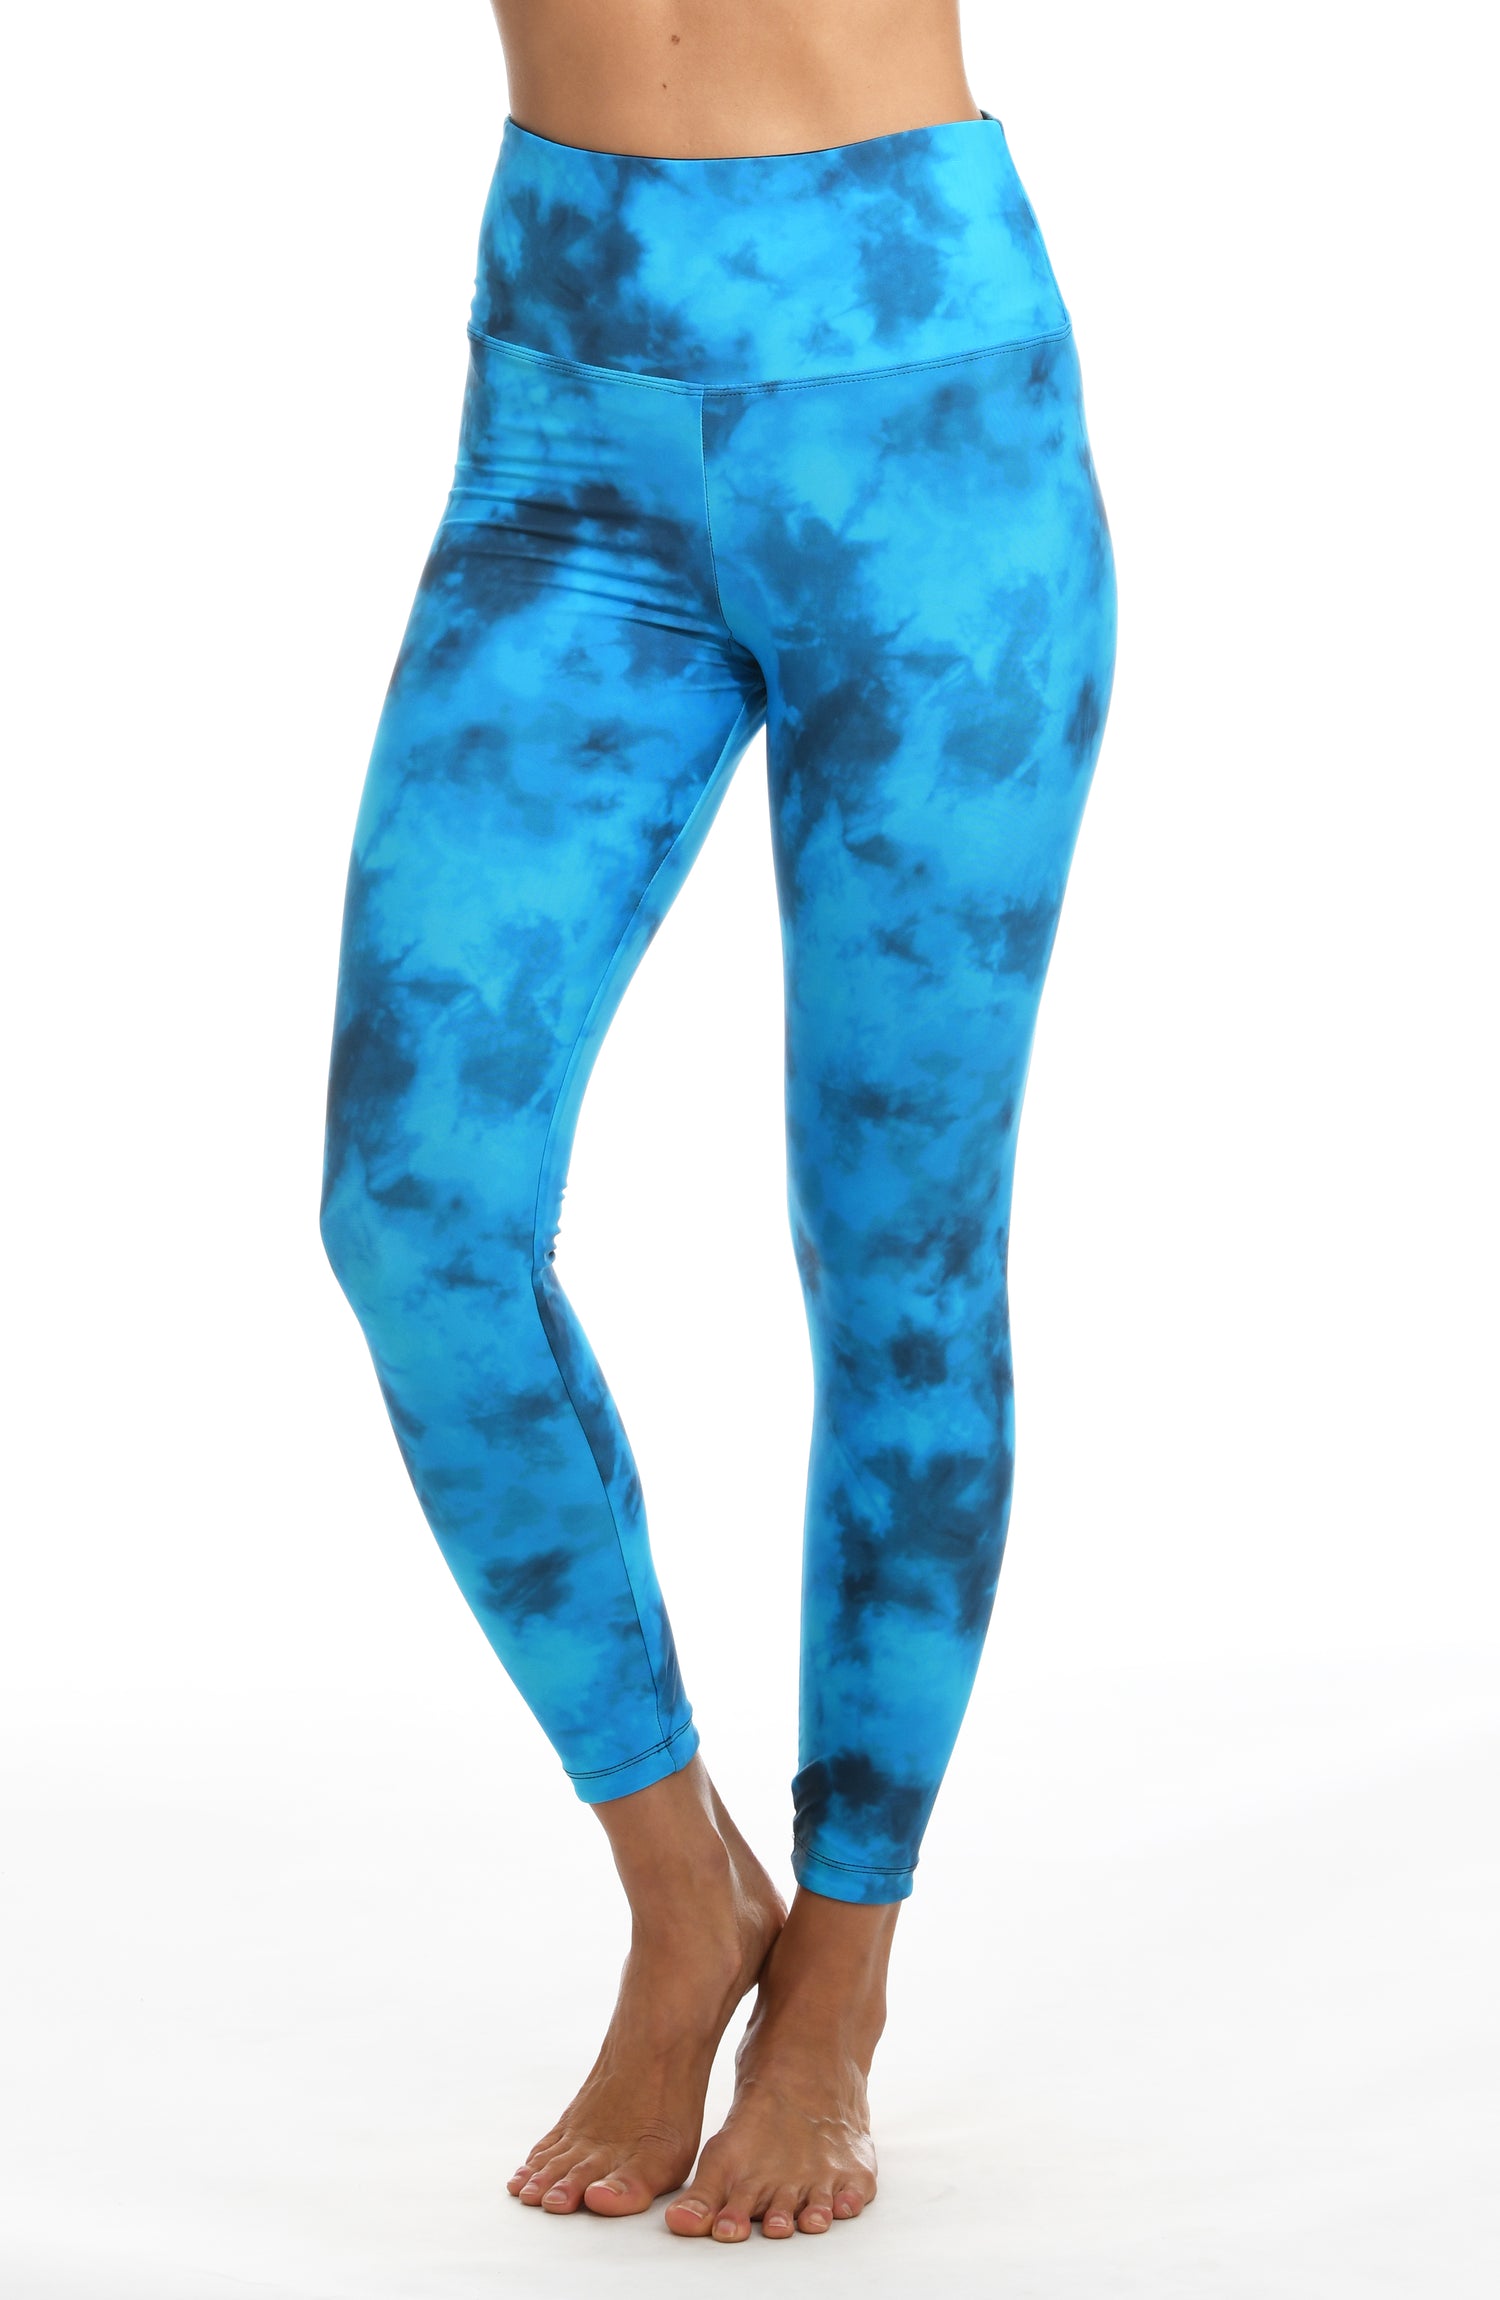 Model is wearing a blue dreamy cloud-inspired printed high waist legging from our Head in the Clouds collection.